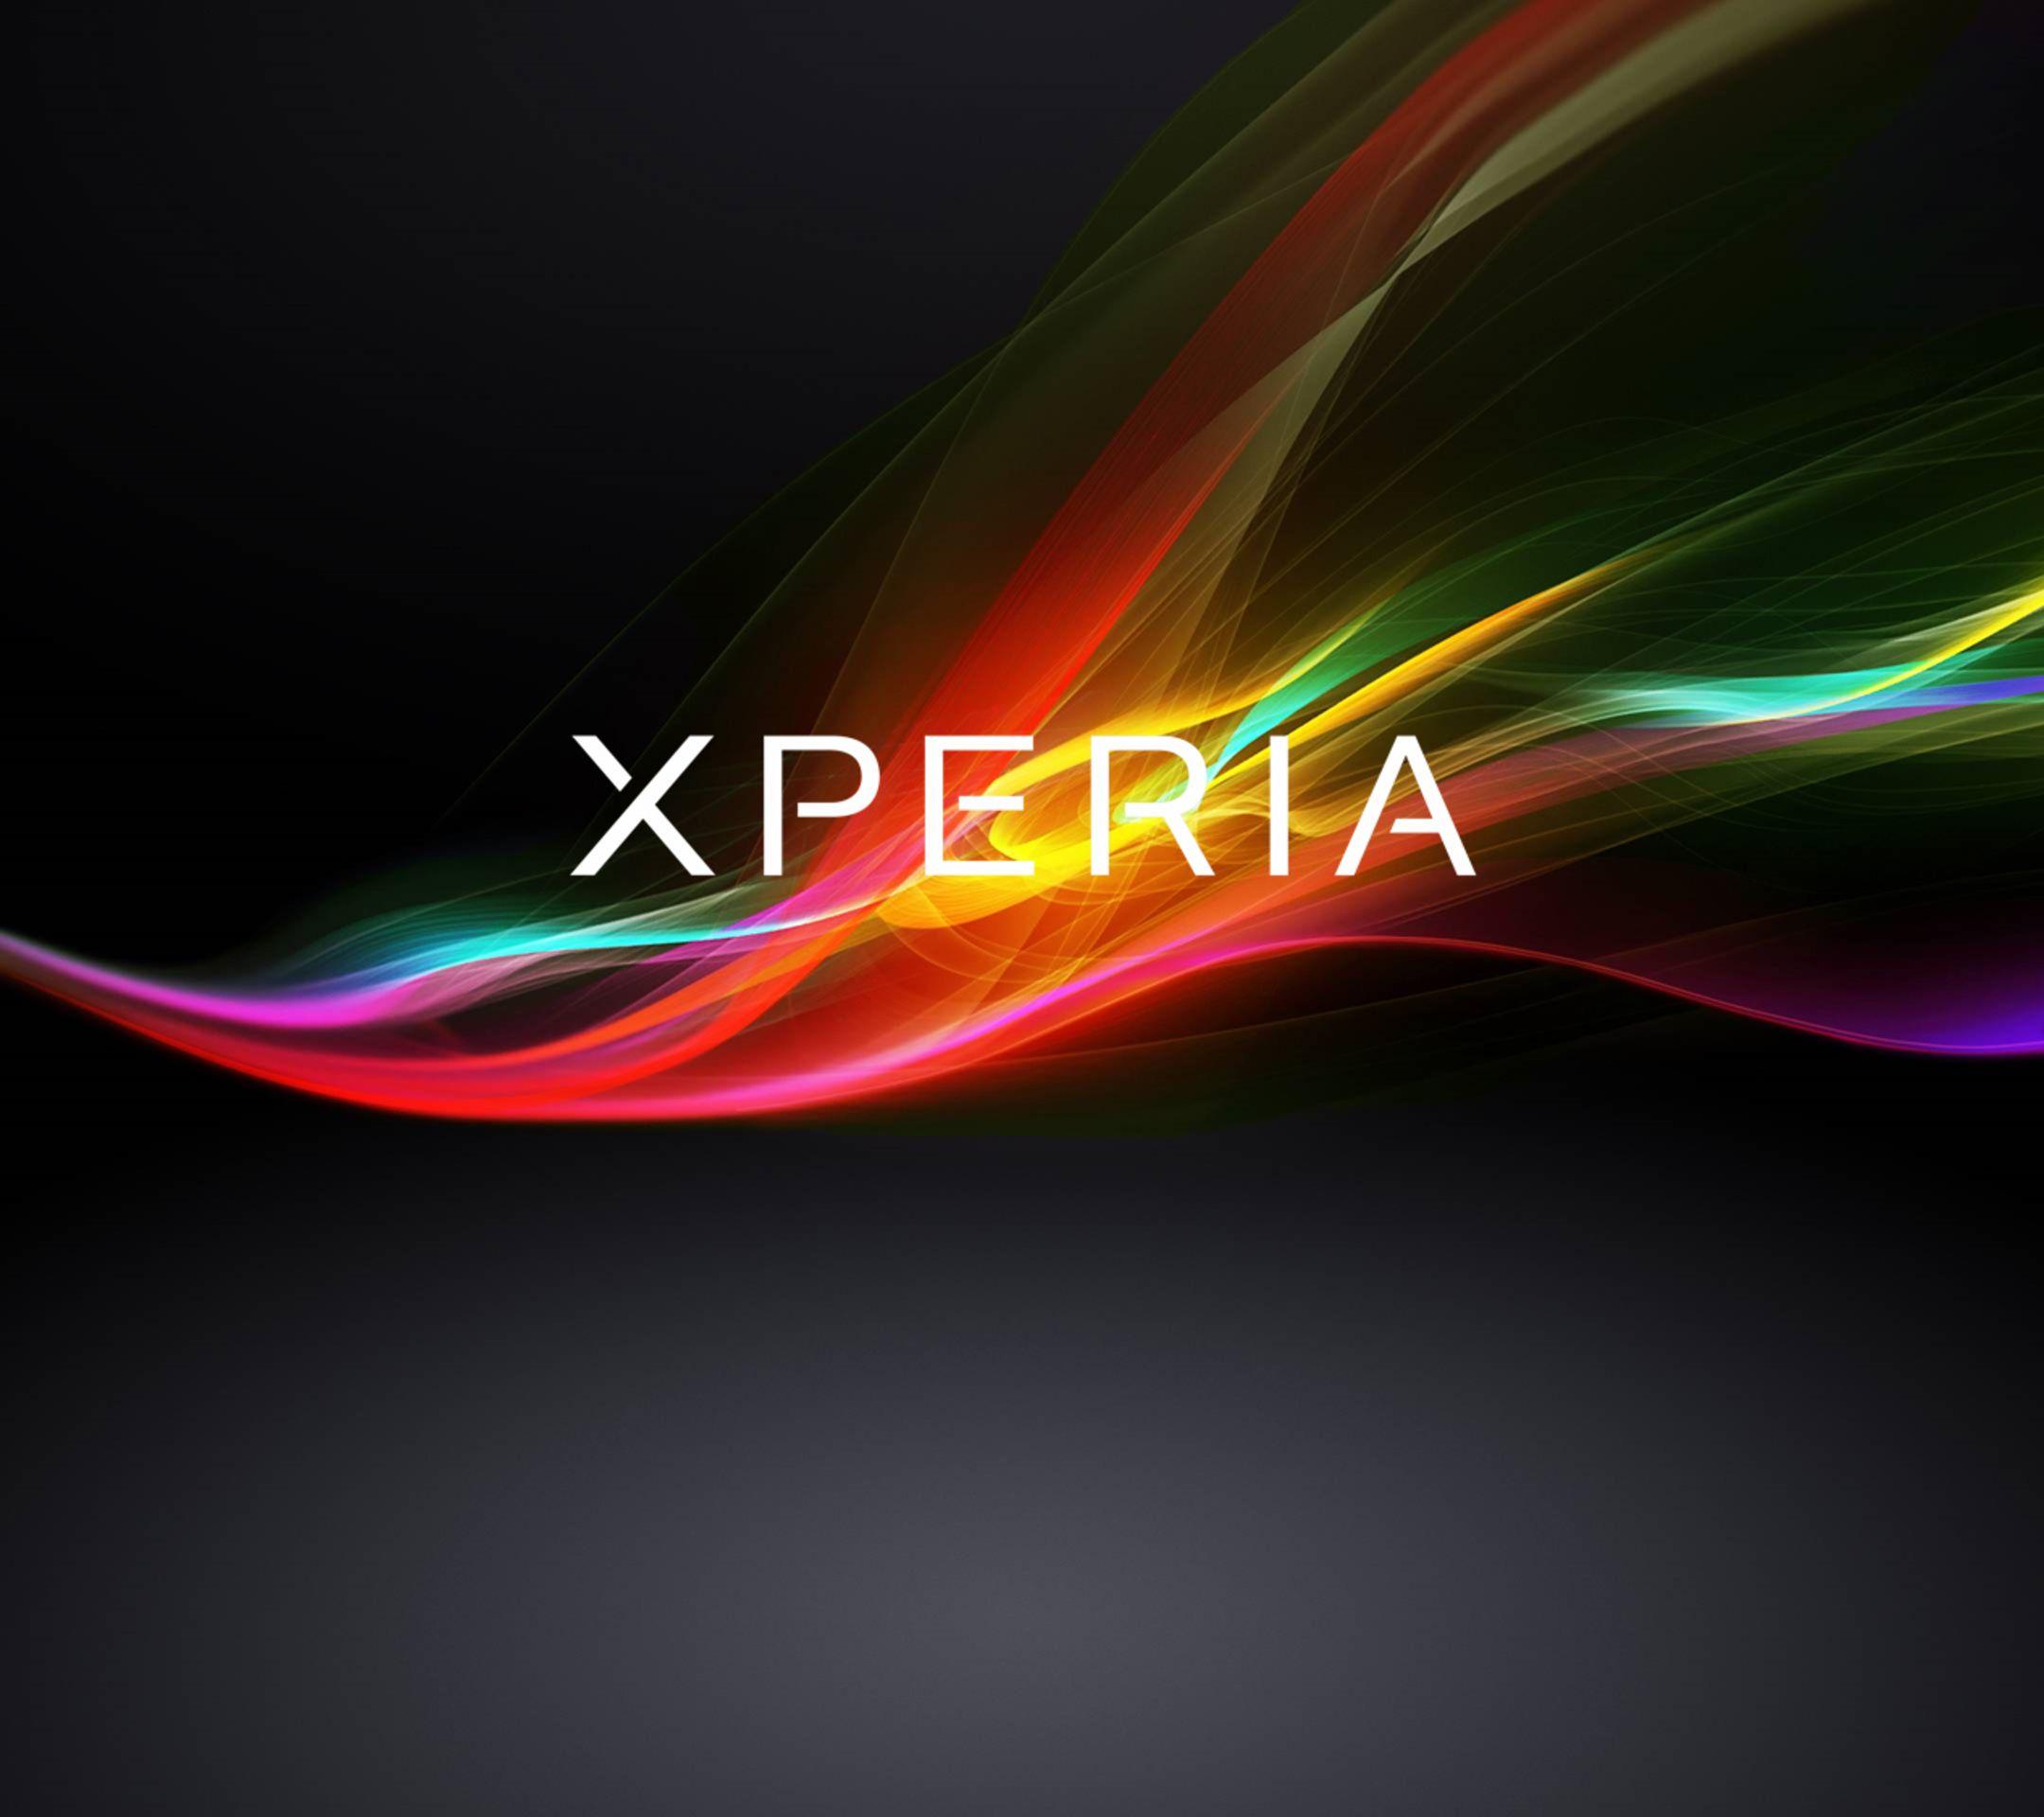 Sony Xperia Logo Wallpapers Top Free Sony Xperia Logo Backgrounds Wallpaperaccess